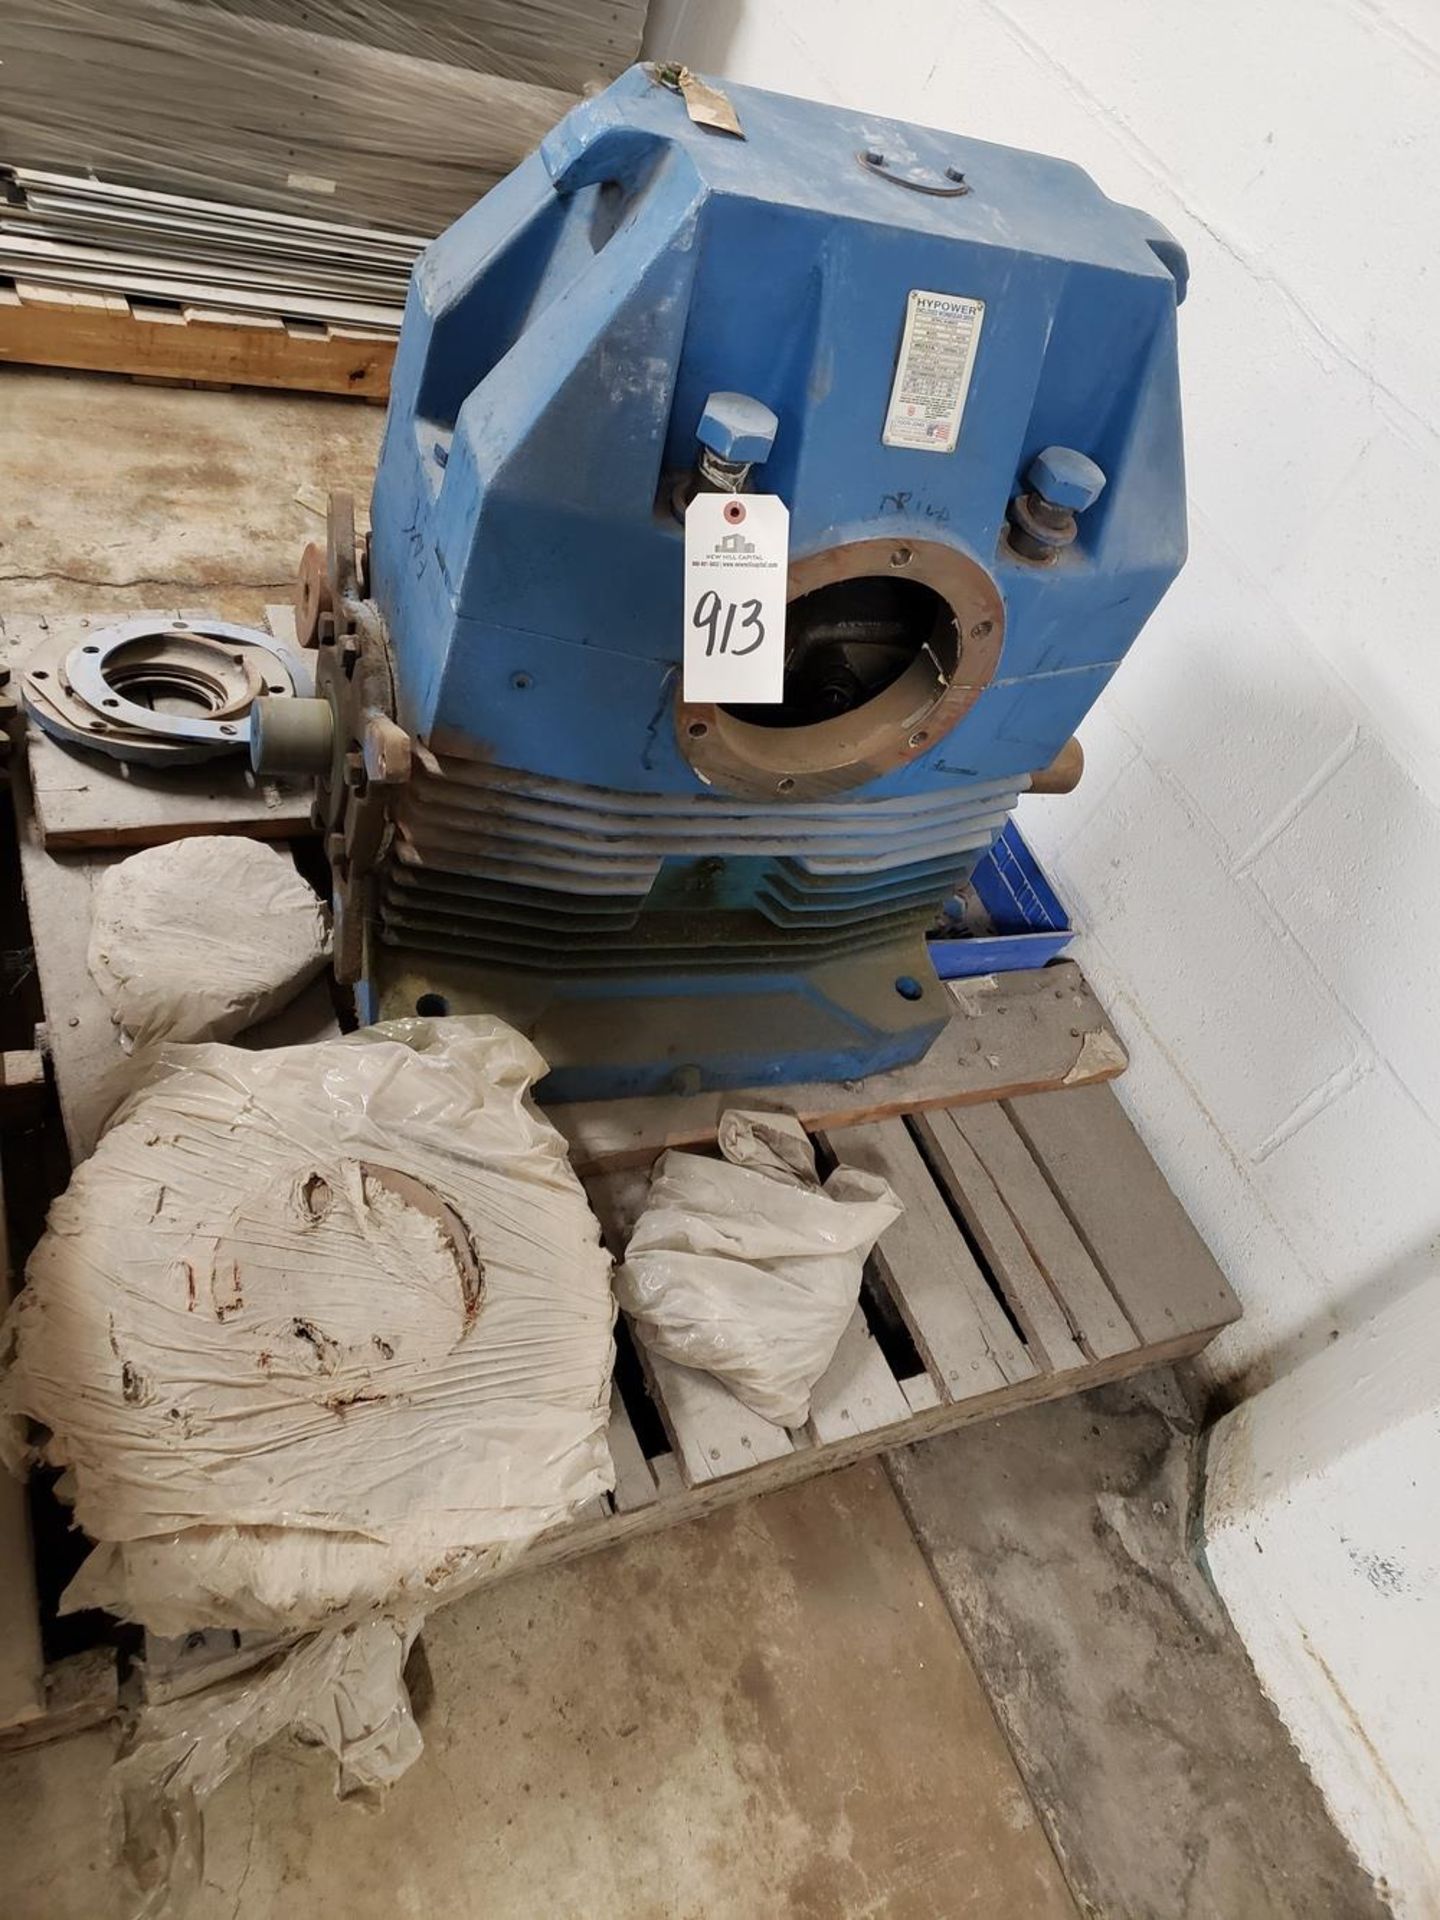 Roote-Jones Hypower Wormgear Drive - Subject to Bulk Bid Lot 884B -The Greater of t | Rig Fee: $75